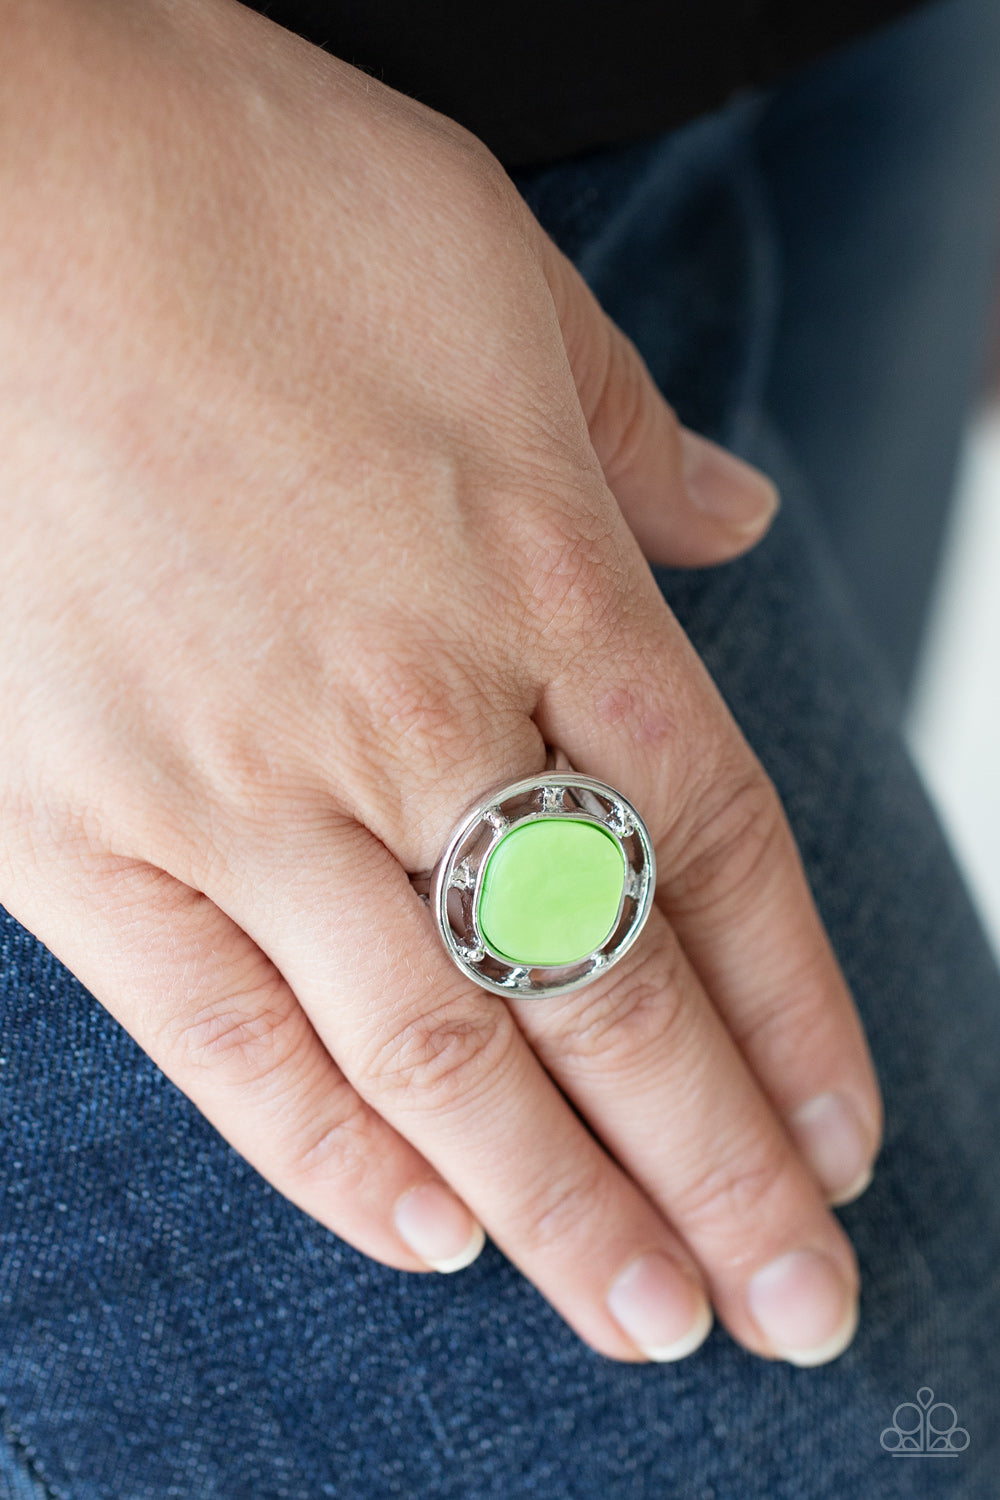 PRE-ORDER - Paparazzi Encompassing Pearlescence - Green - Ring - $5 Jewelry with Ashley Swint